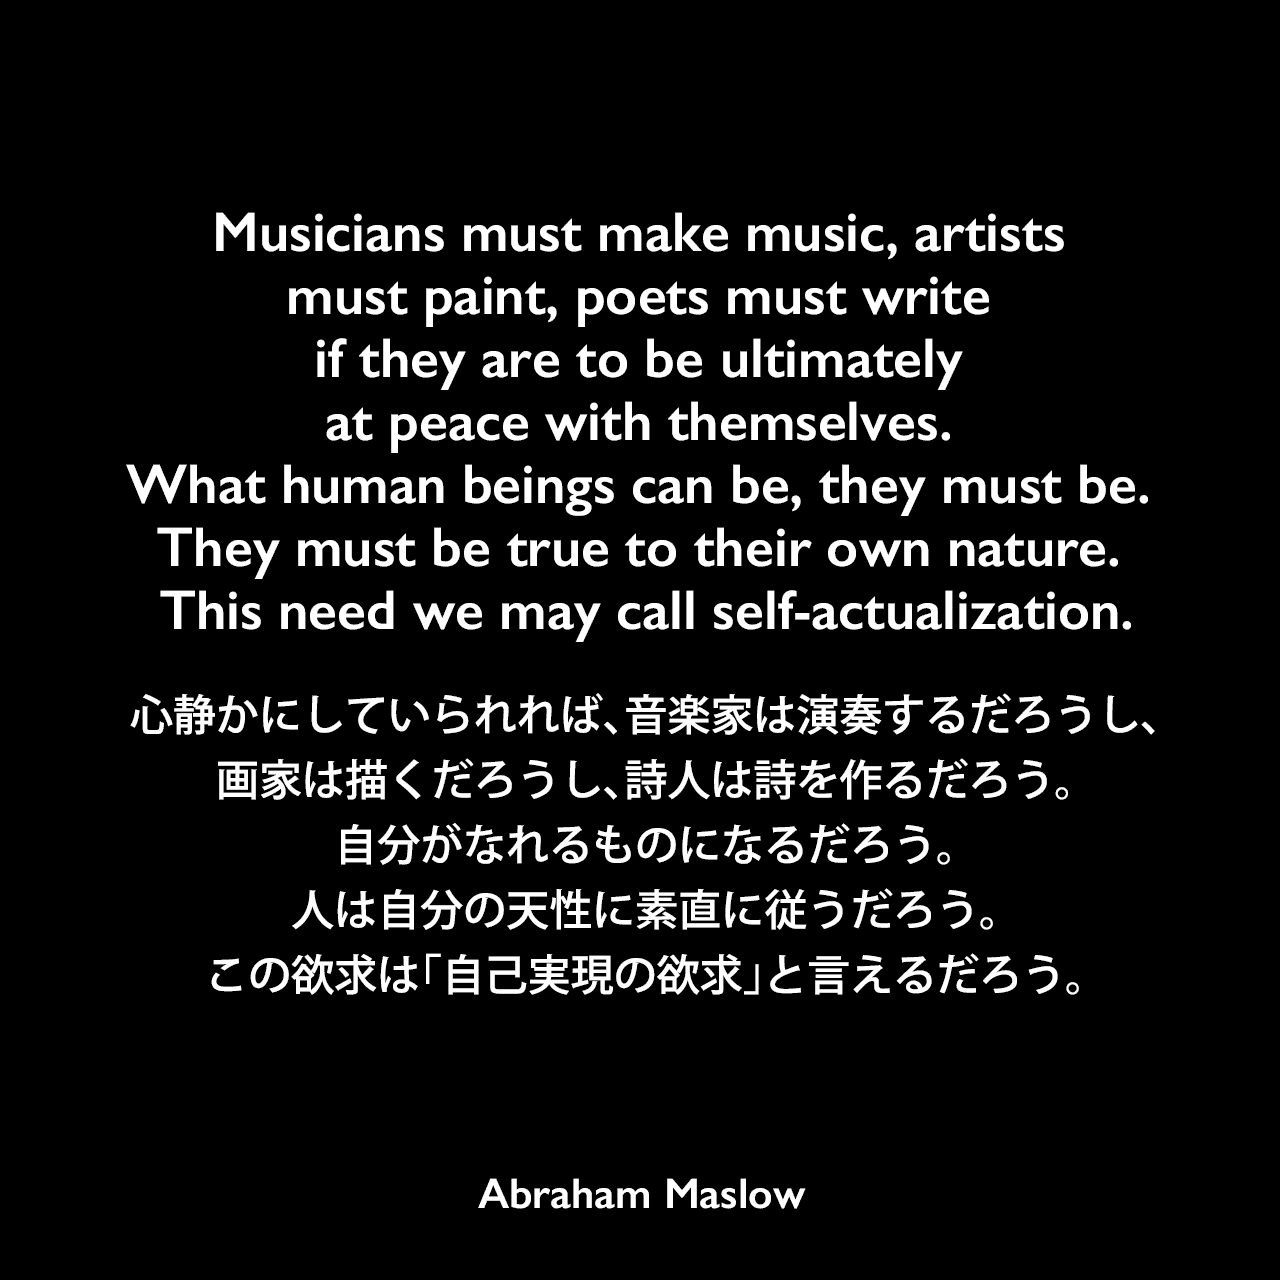 Musicians must make music, artists must paint, poets must write if they are to be ultimately at peace with themselves. What human beings can be, they must be. They must be true to their own nature. This need we may call self-actualization.心静かにしていられれば、音楽家は演奏するだろうし、画家は描くだろうし、詩人は詩を作るだろう。自分がなれるものになるだろう。人は自分の天性に素直に従うだろう。この欲求は「自己実現の欲求」と言えるだろう。Abraham Maslow